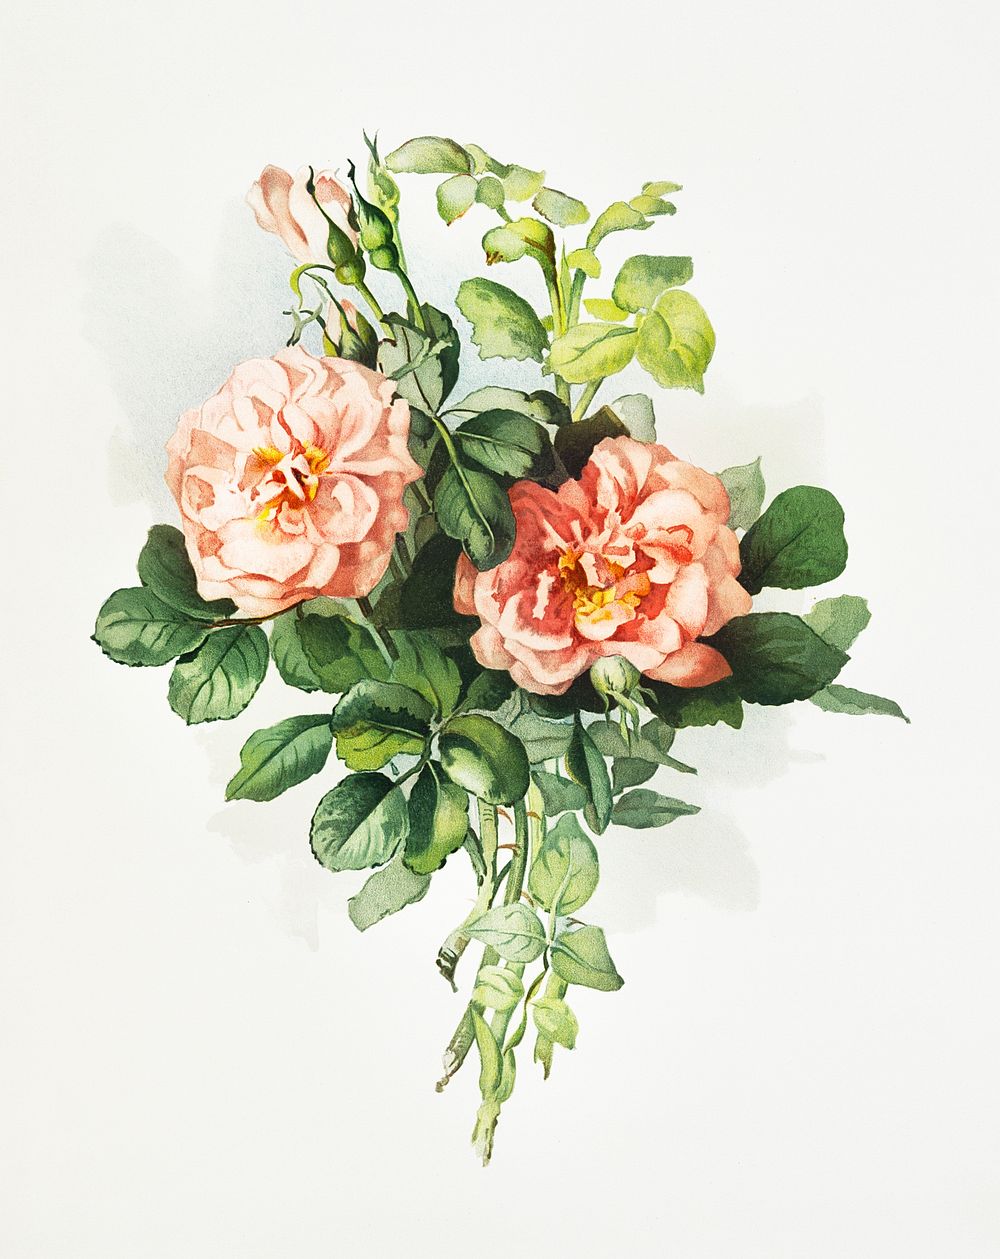 Blush rose from The Miriam and Ira D. Wallach Division Of Art, Prints and Photographs: Picture Collection published by L.…